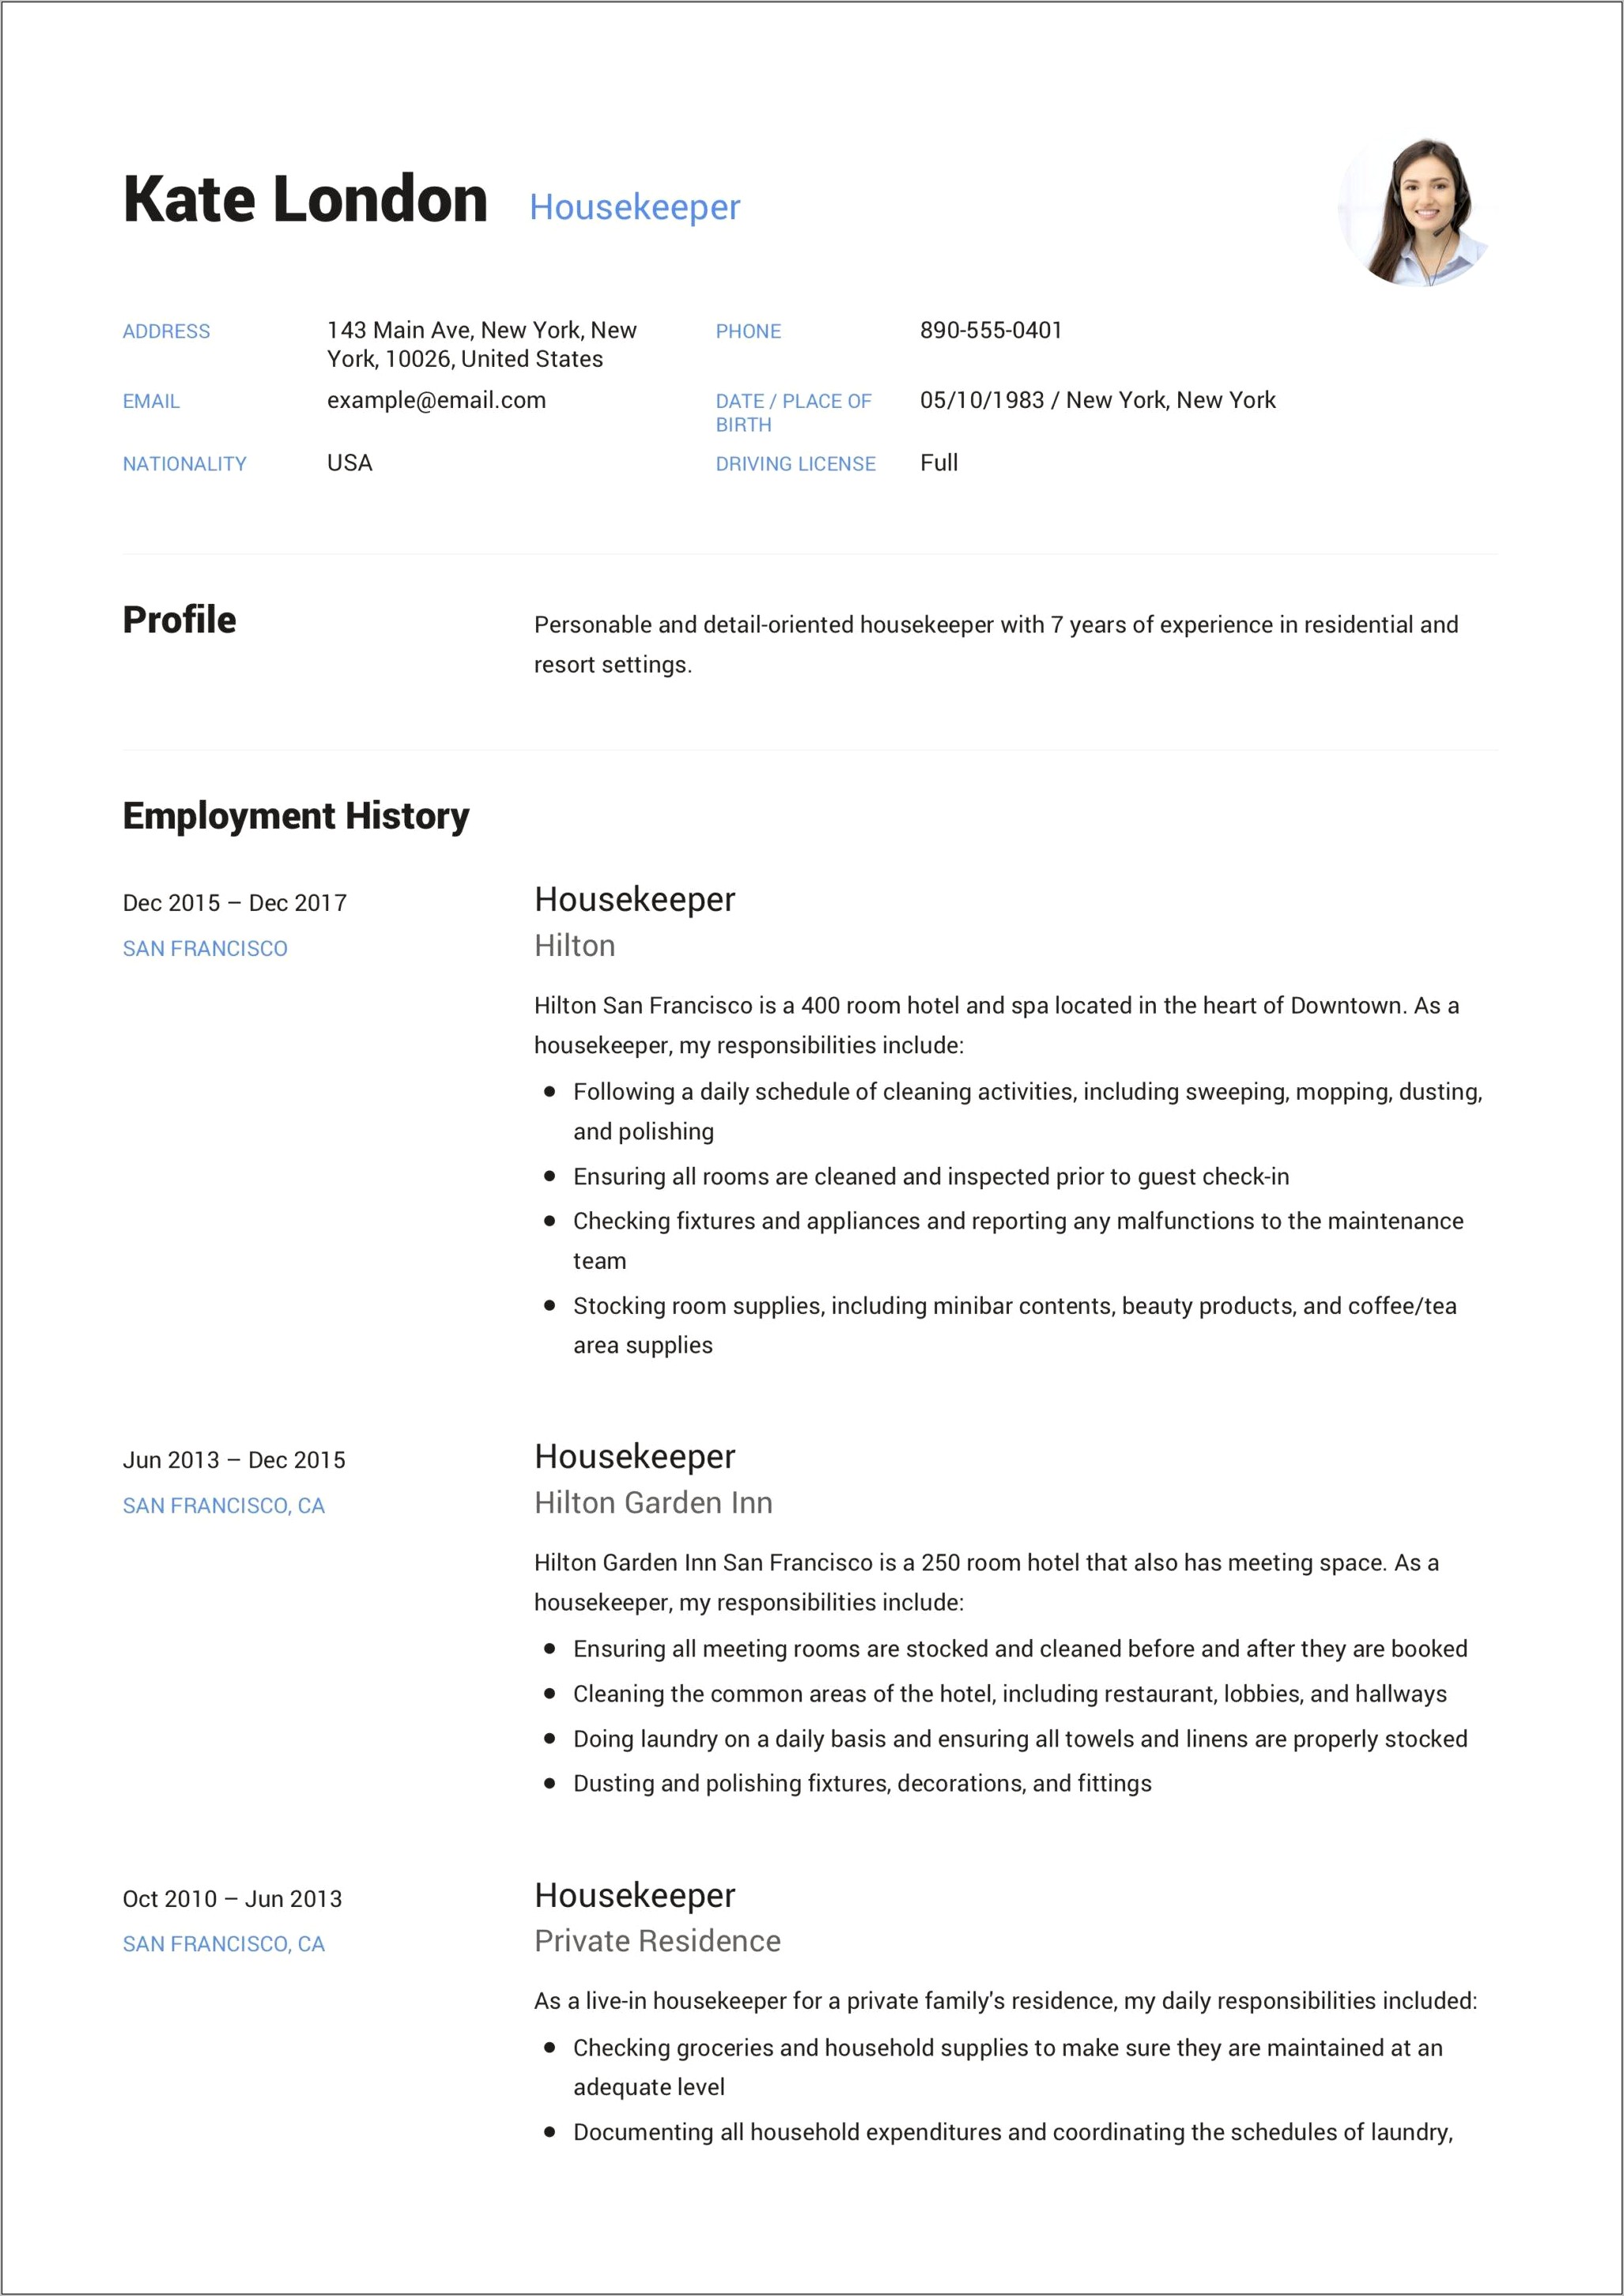 Resume Objective For A Housekeeper